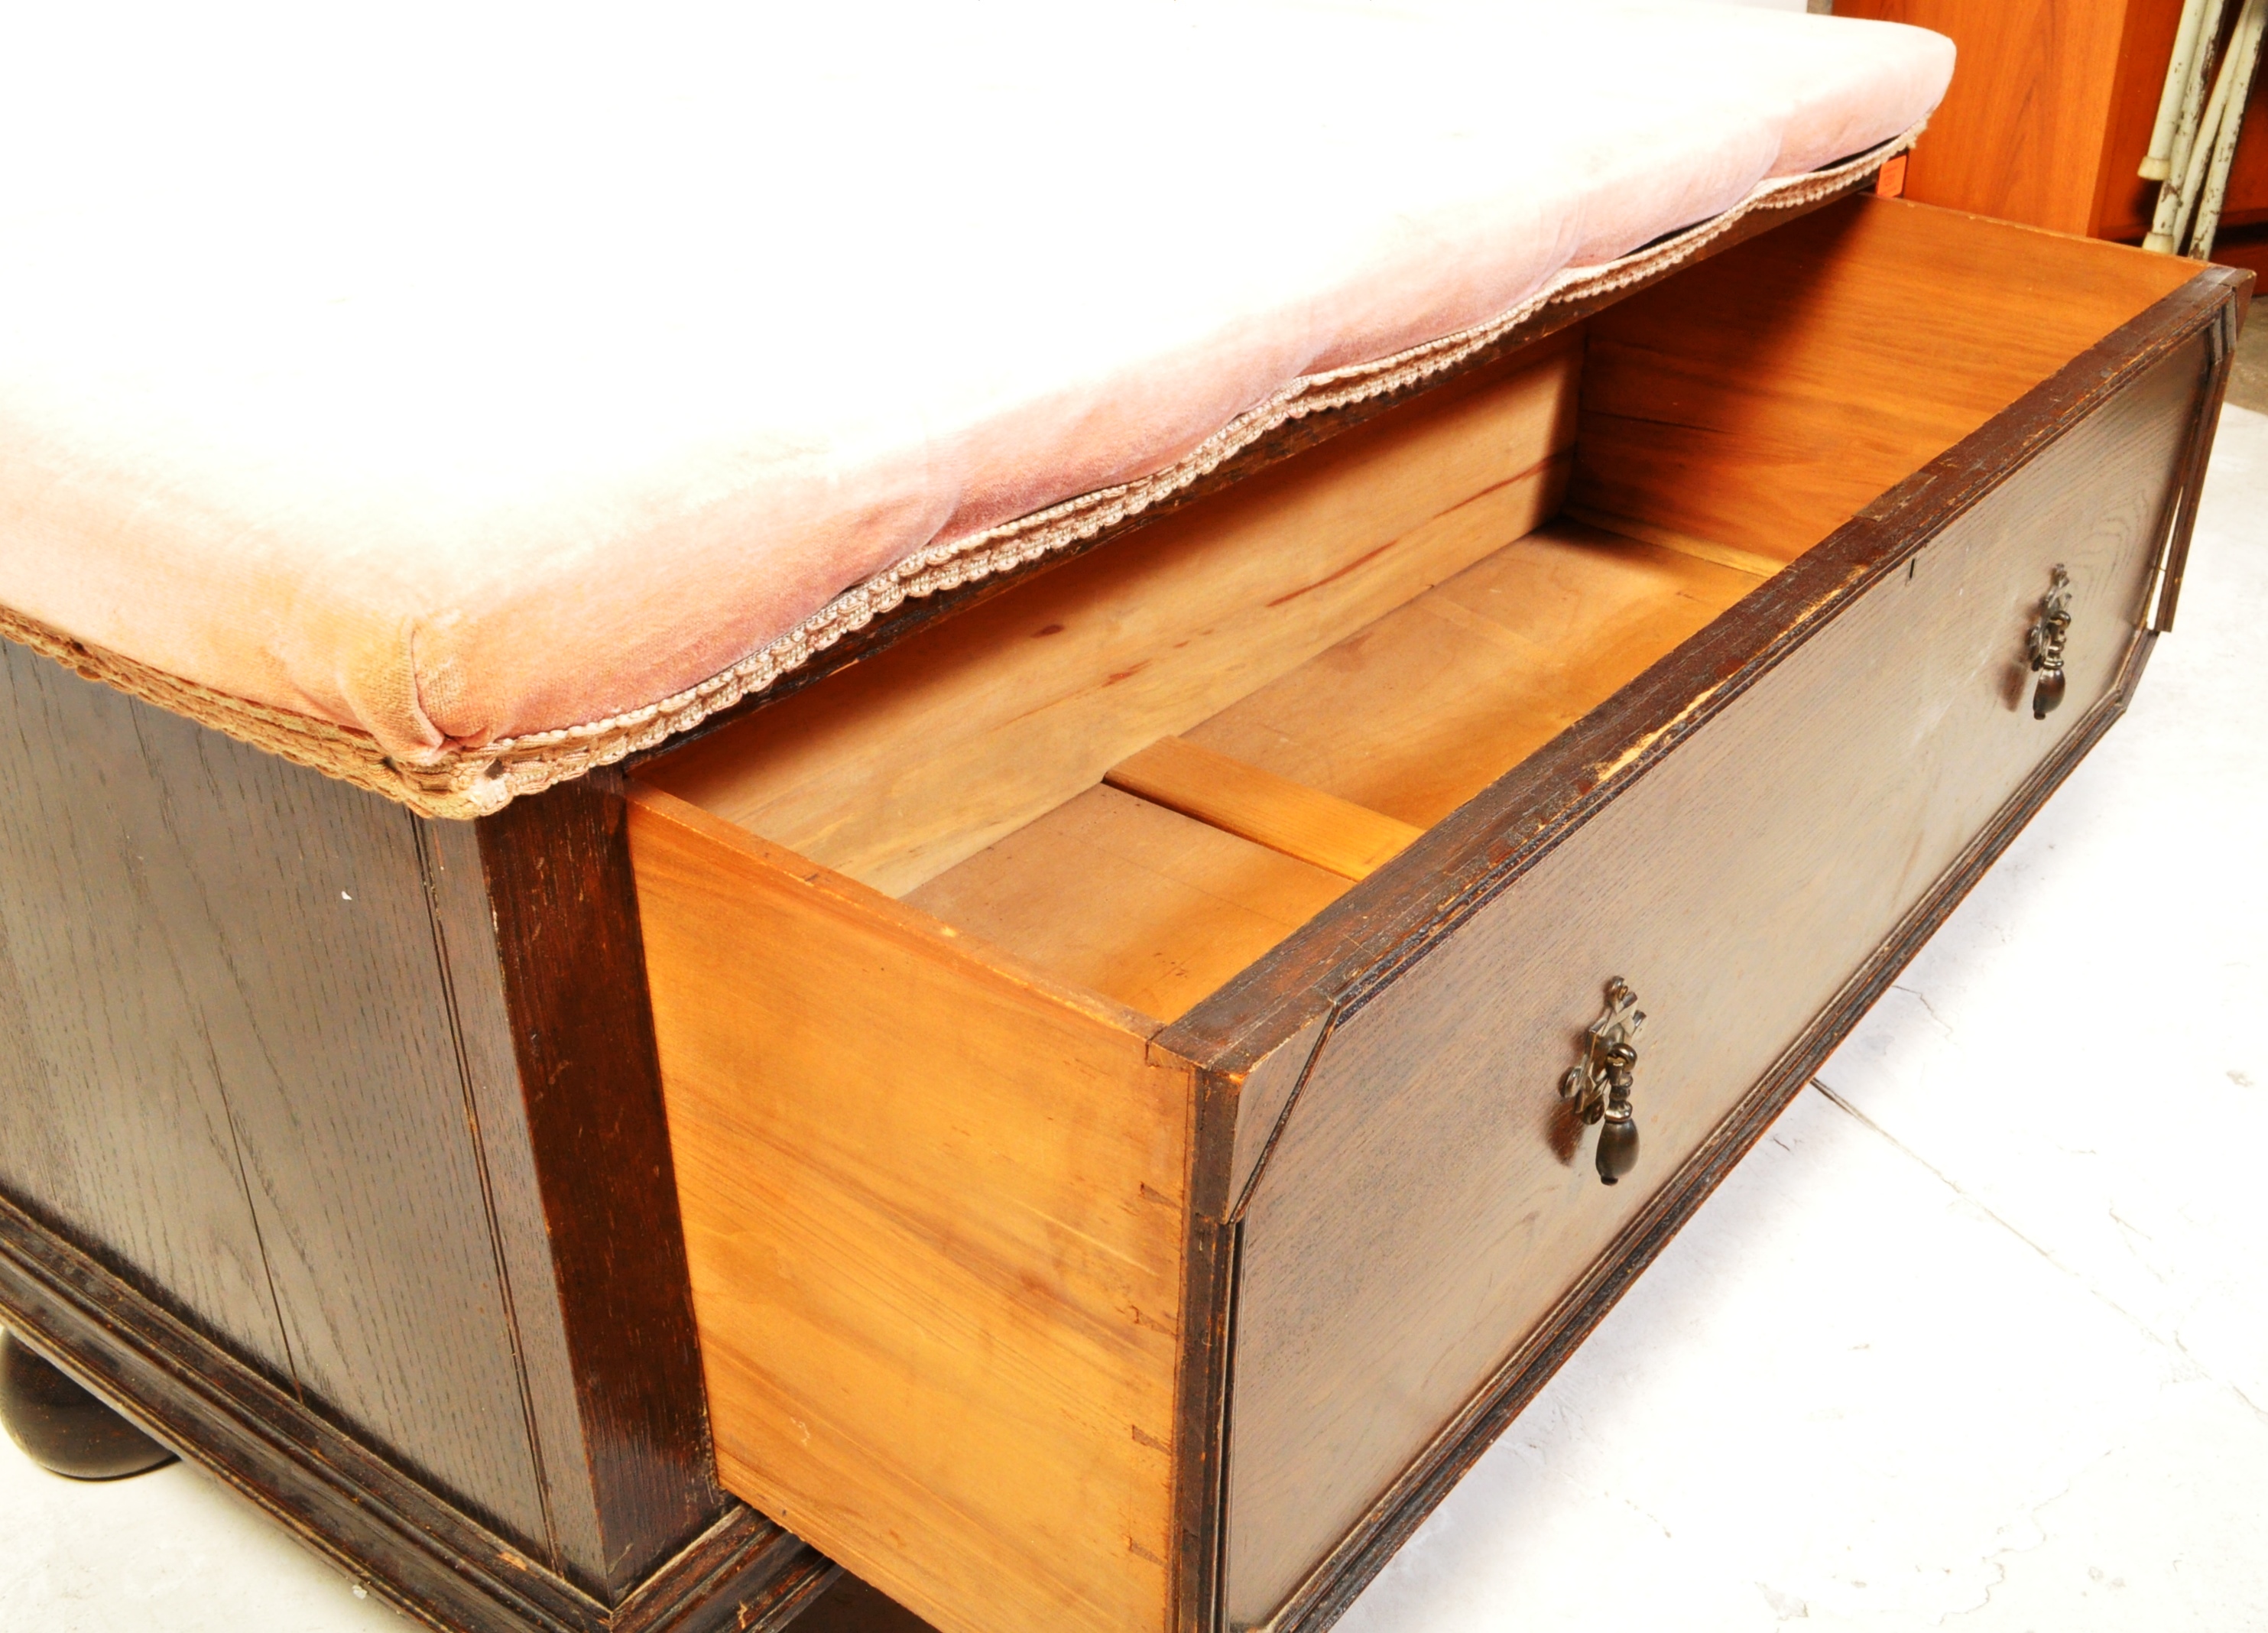 EARLY 20TH CENTURY CONVERTED OAK OTTOMAN - Image 4 of 6